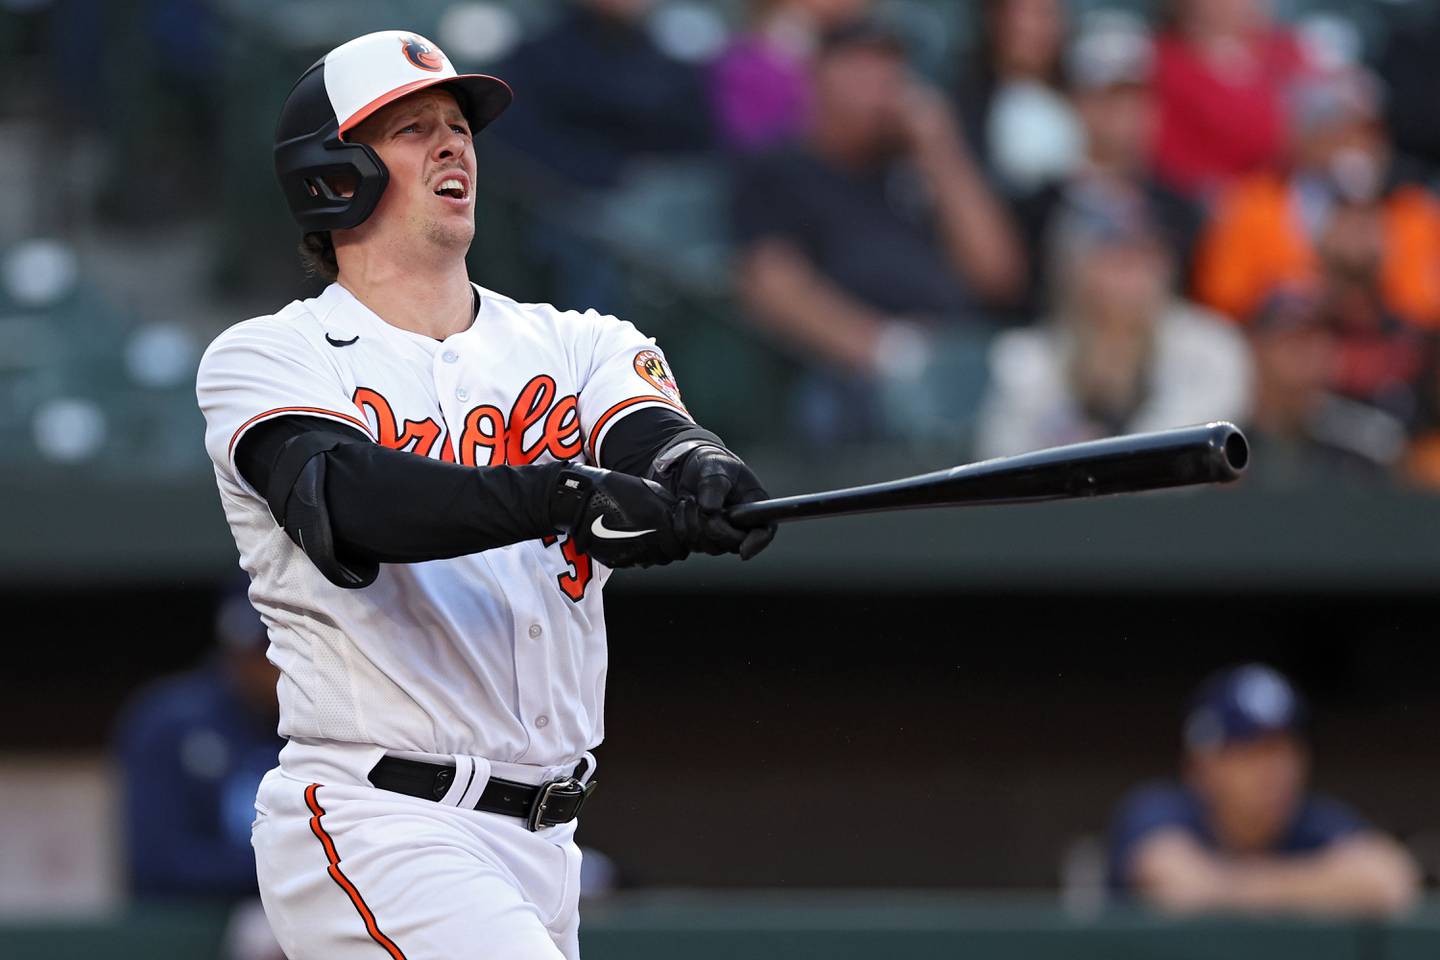 BALTIMORE, MARYLAND - MAY 09: Adley Rutschman #35 of the Baltimore Orioles hits a two run home run against the Tampa Bay Rays during the third inning at Oriole Park at Camden Yards on May 9, 2023 in Baltimore, Maryland.